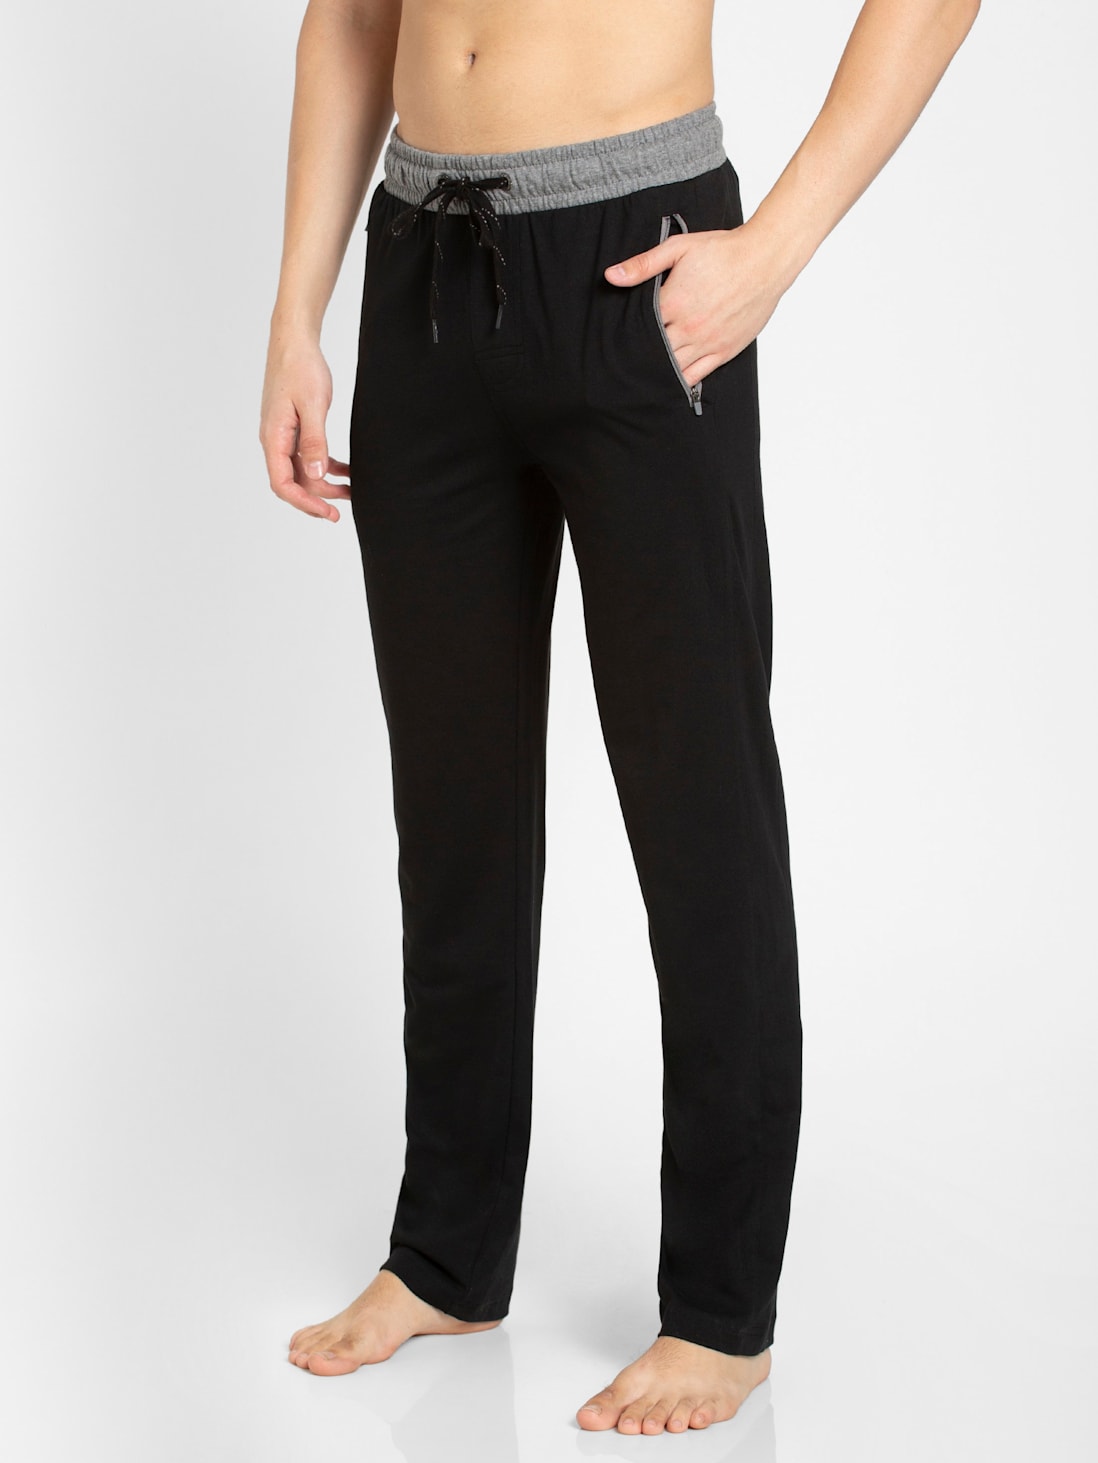 GENTS REFLECTOR LOWER TRACK PANTS FOR MEN